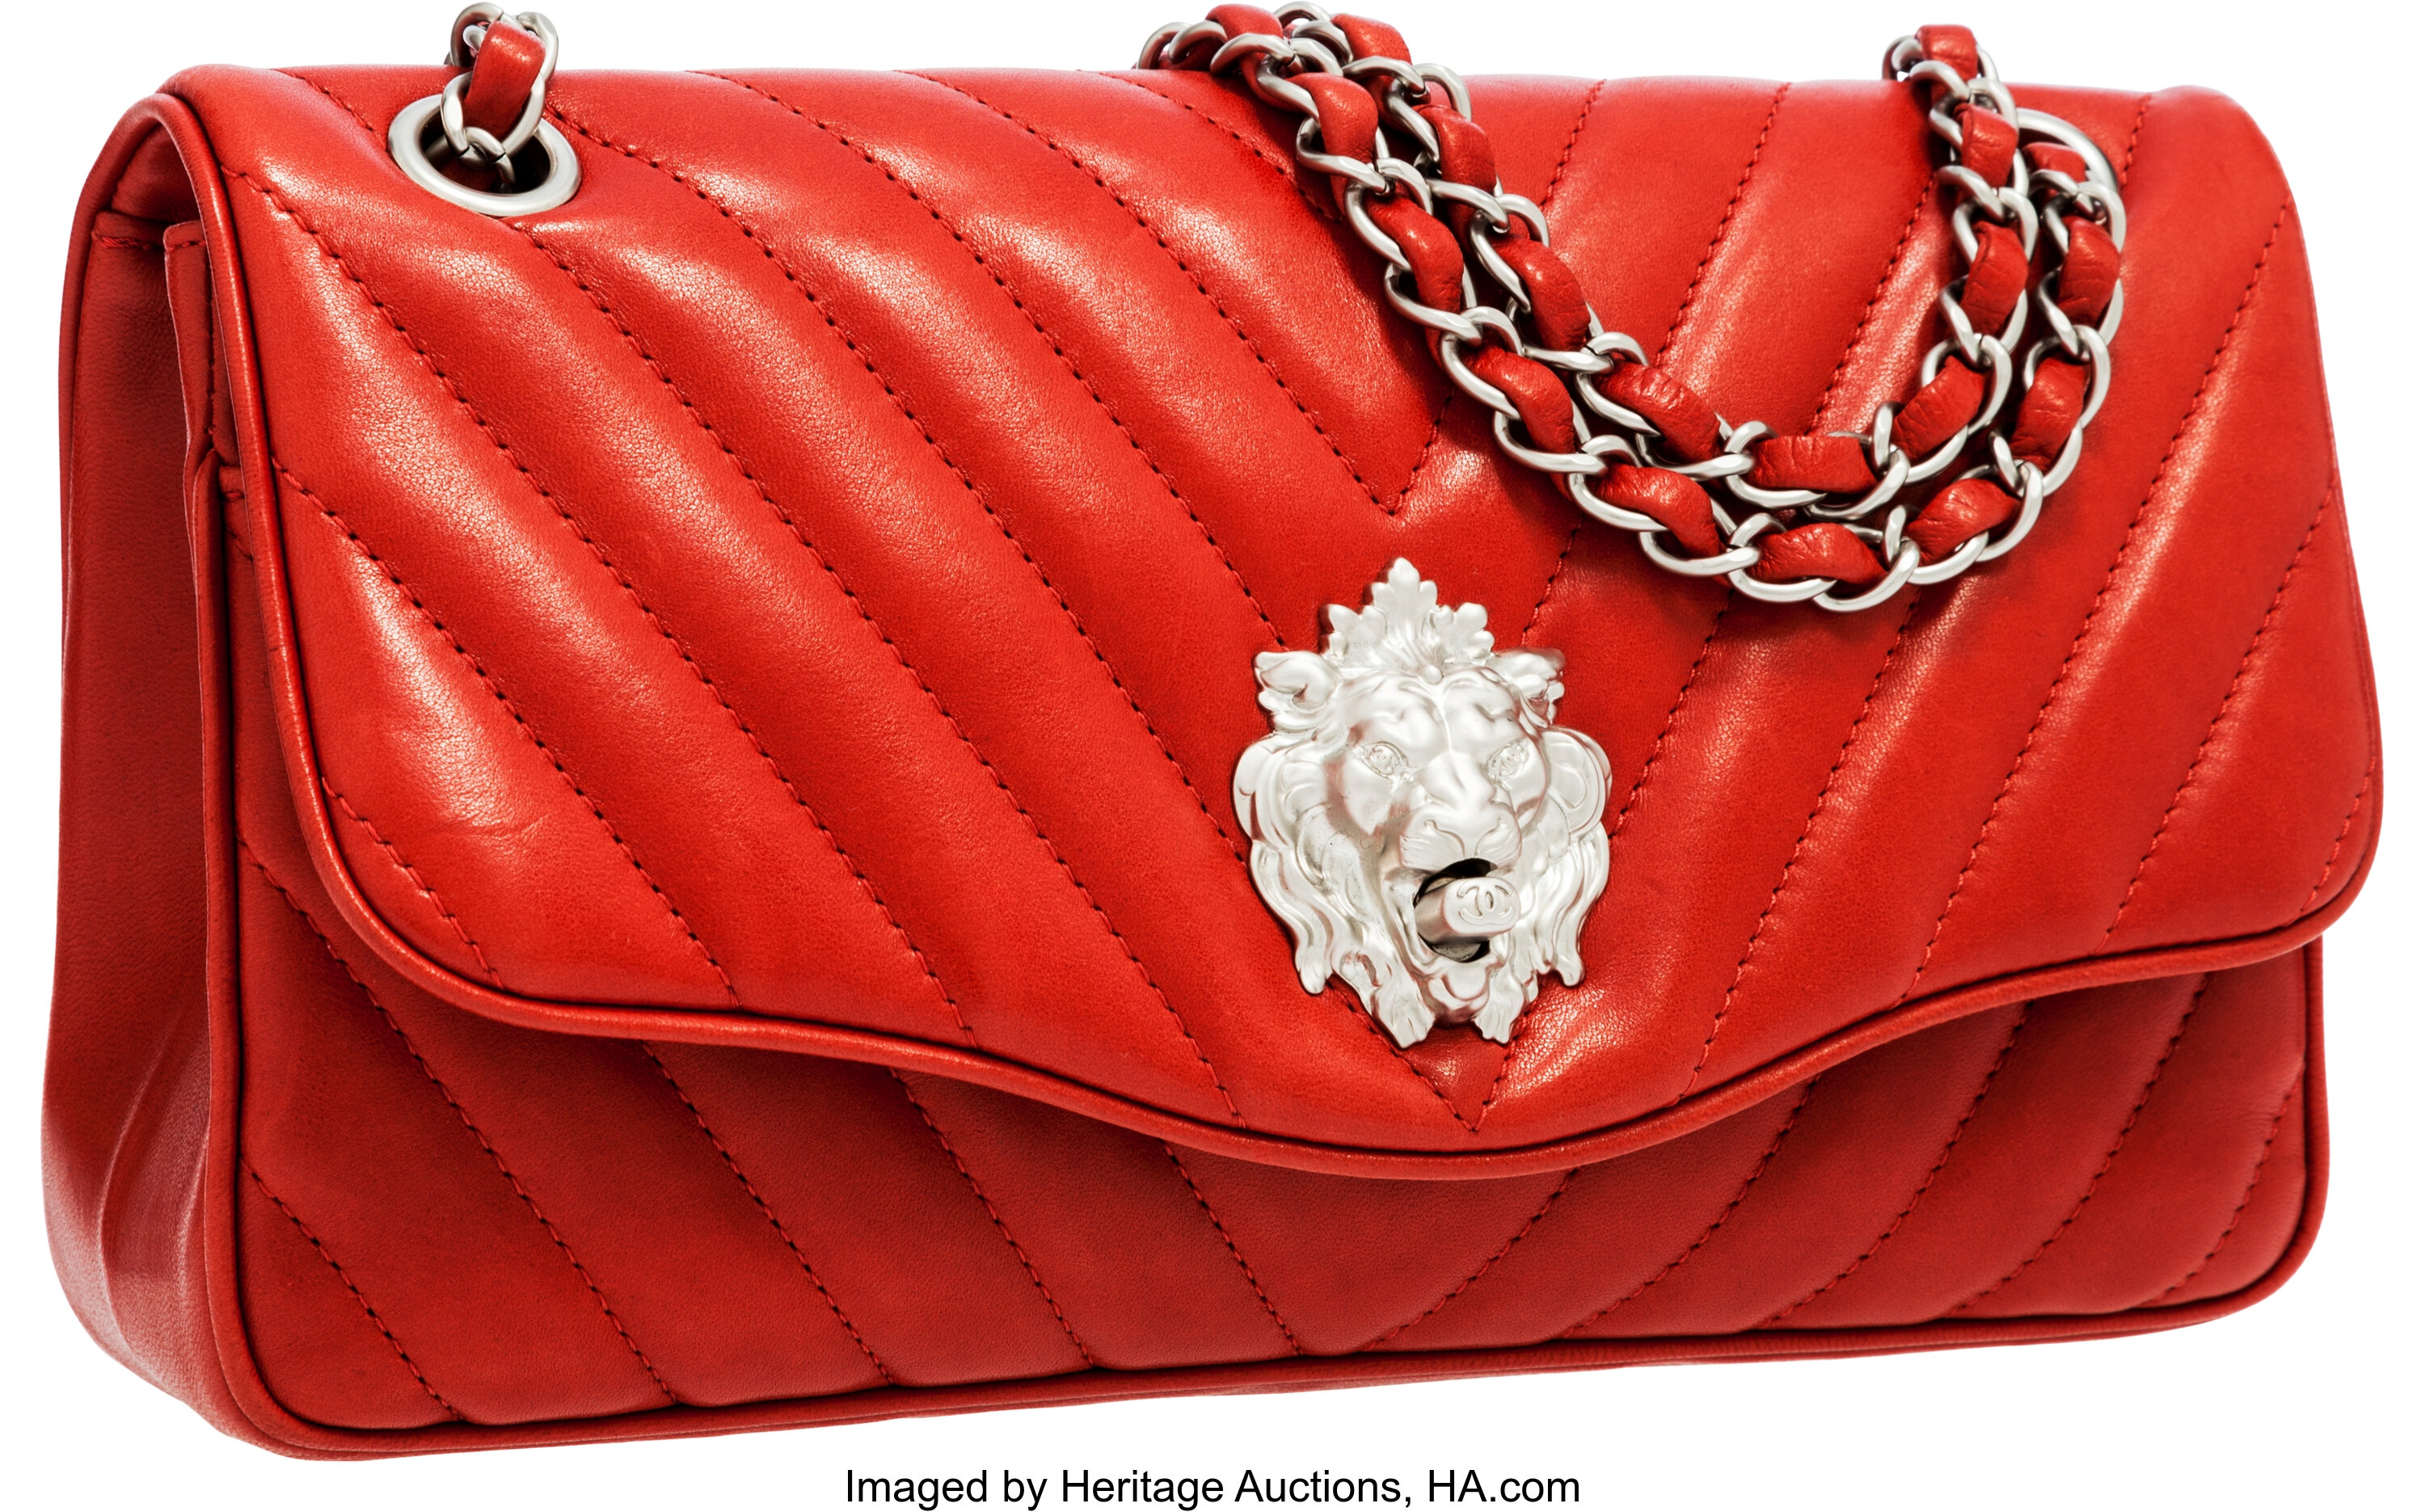 Chanel Red Lambskin Leather Leo Medium Single Flap Bag with Lion